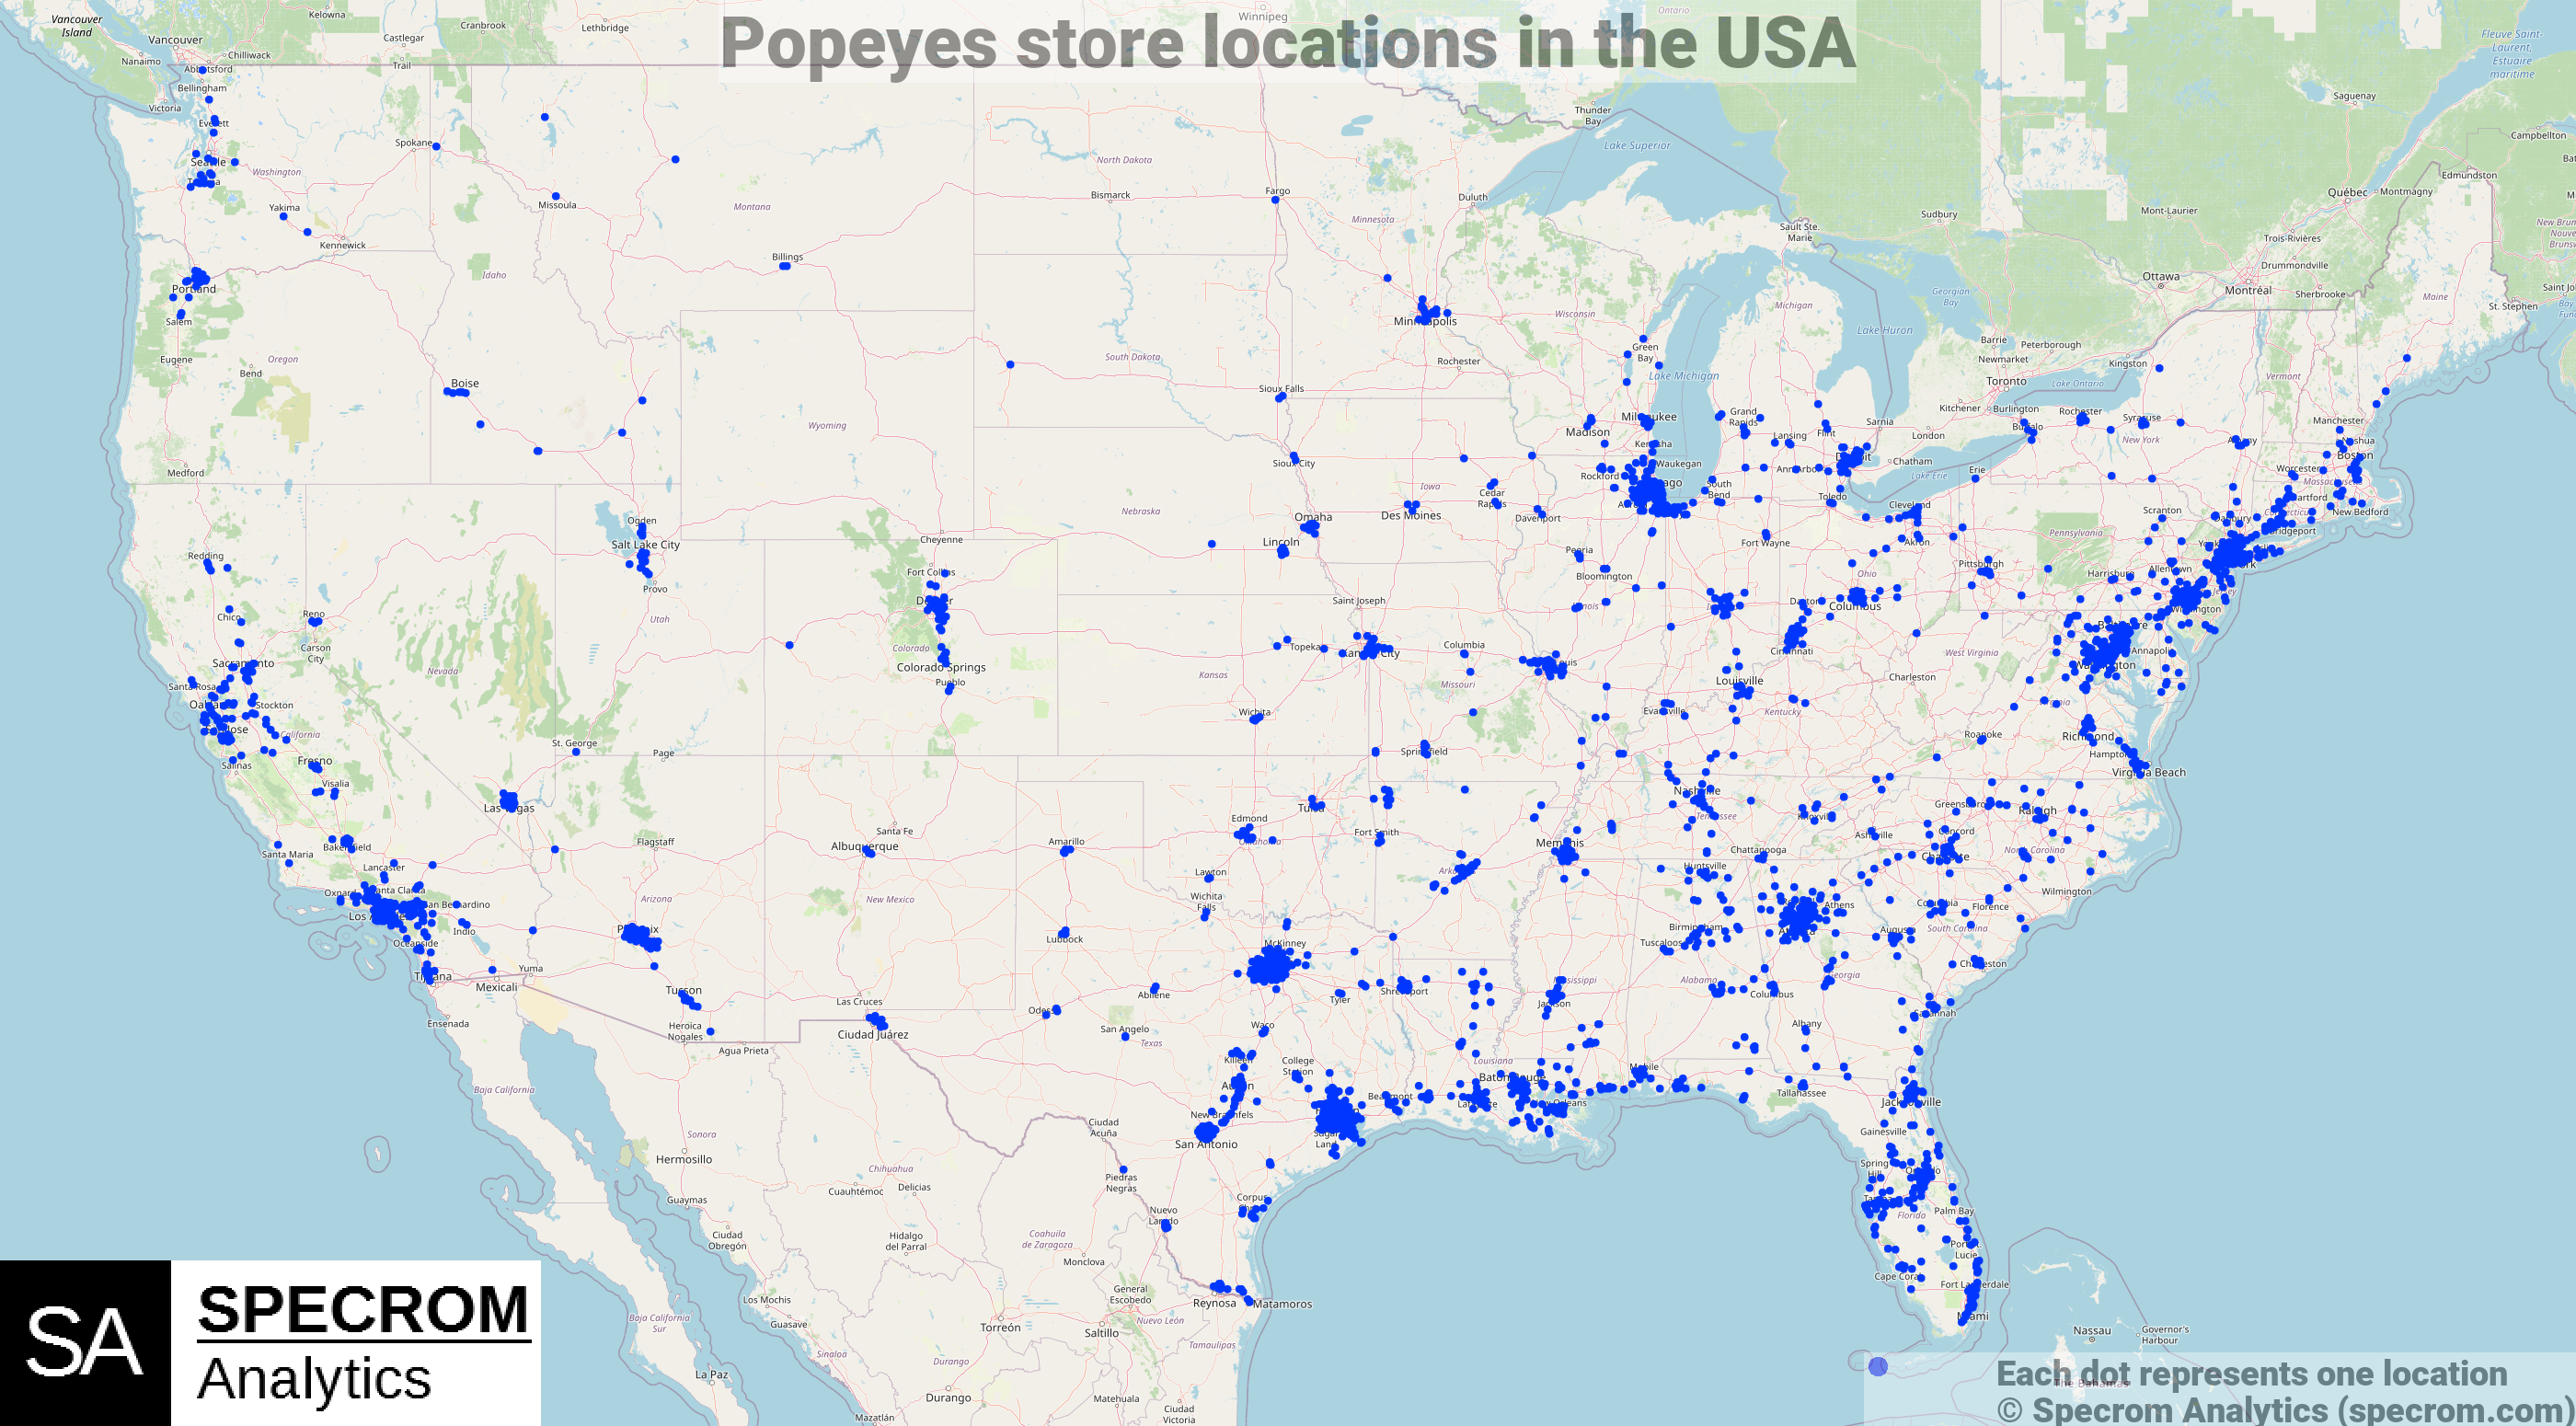 Popeyes store locations in the USA